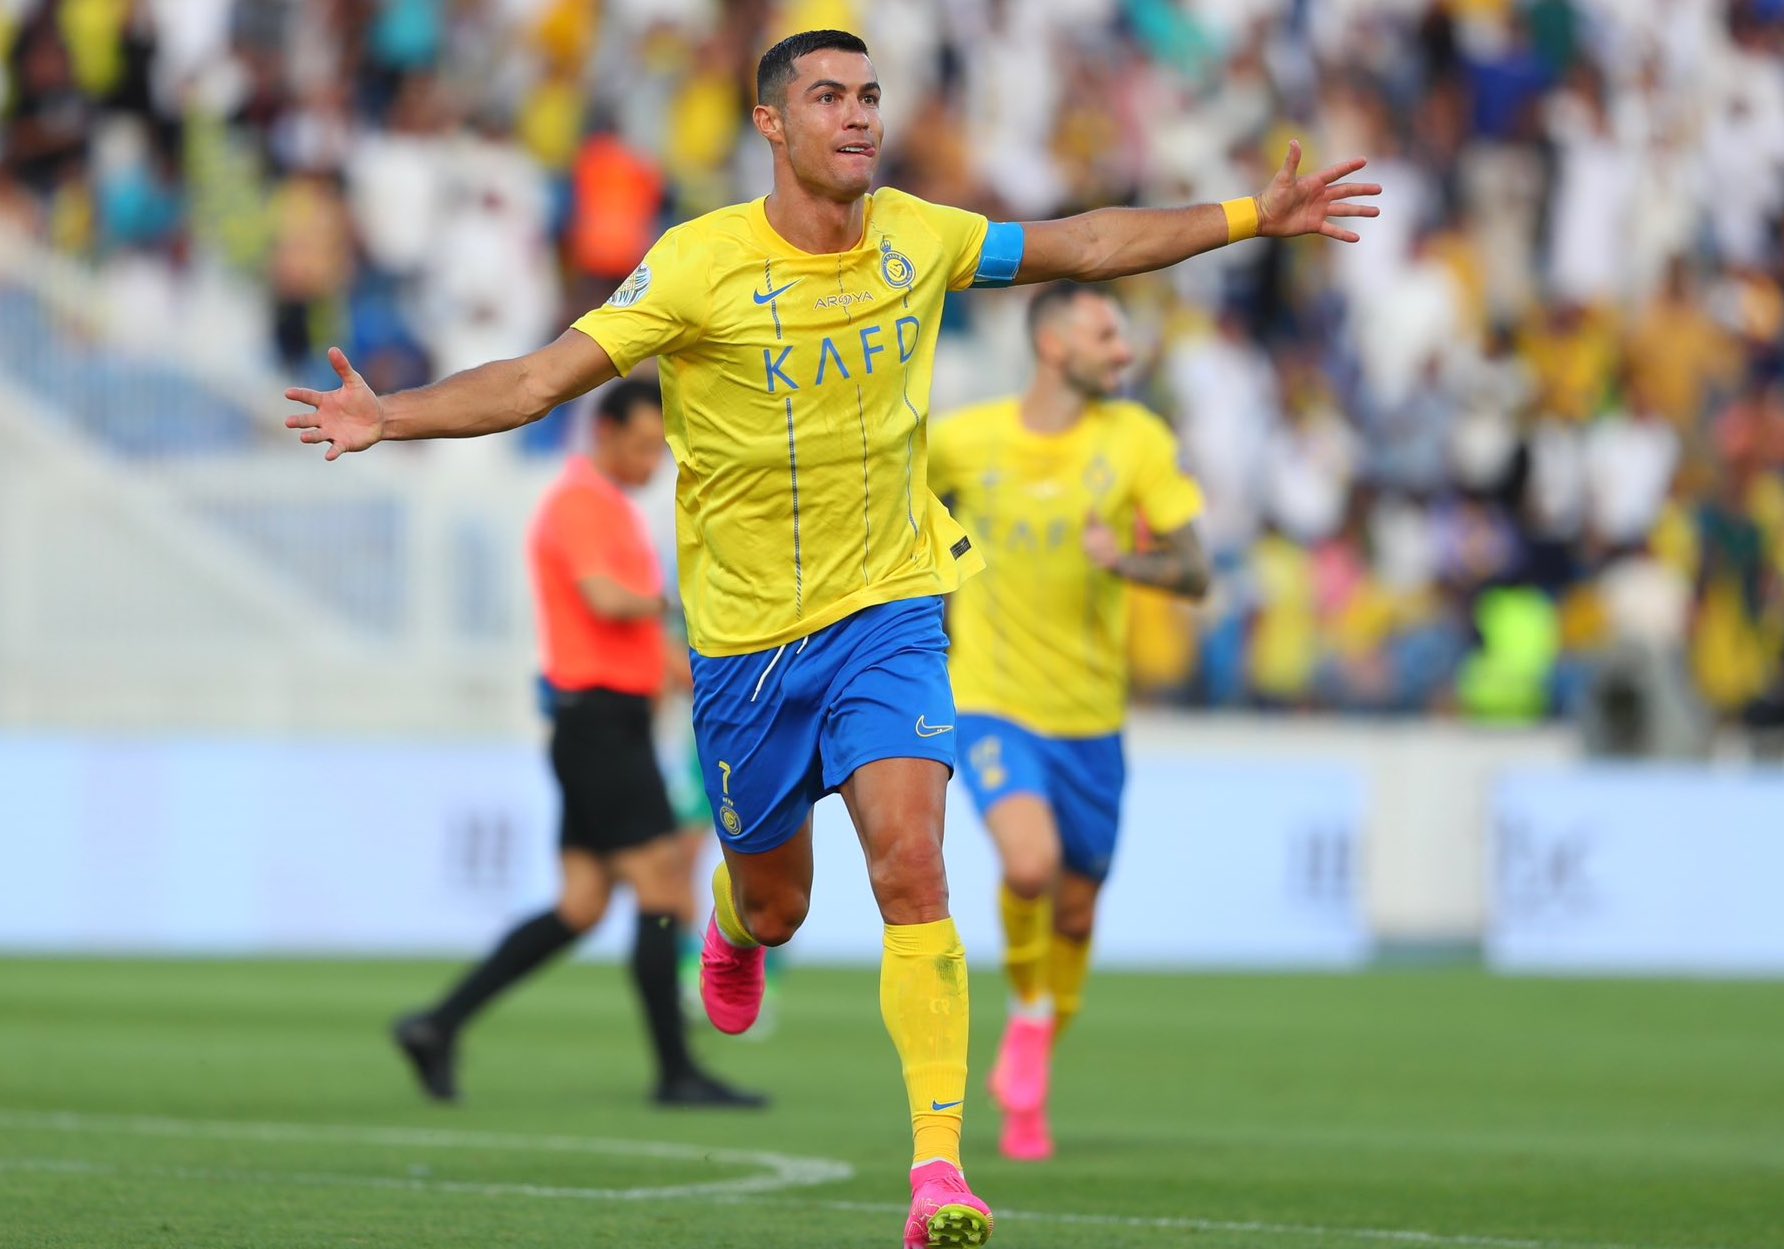 Cristiano Ronaldo is about to win his first championship with Al Nassr CLB club